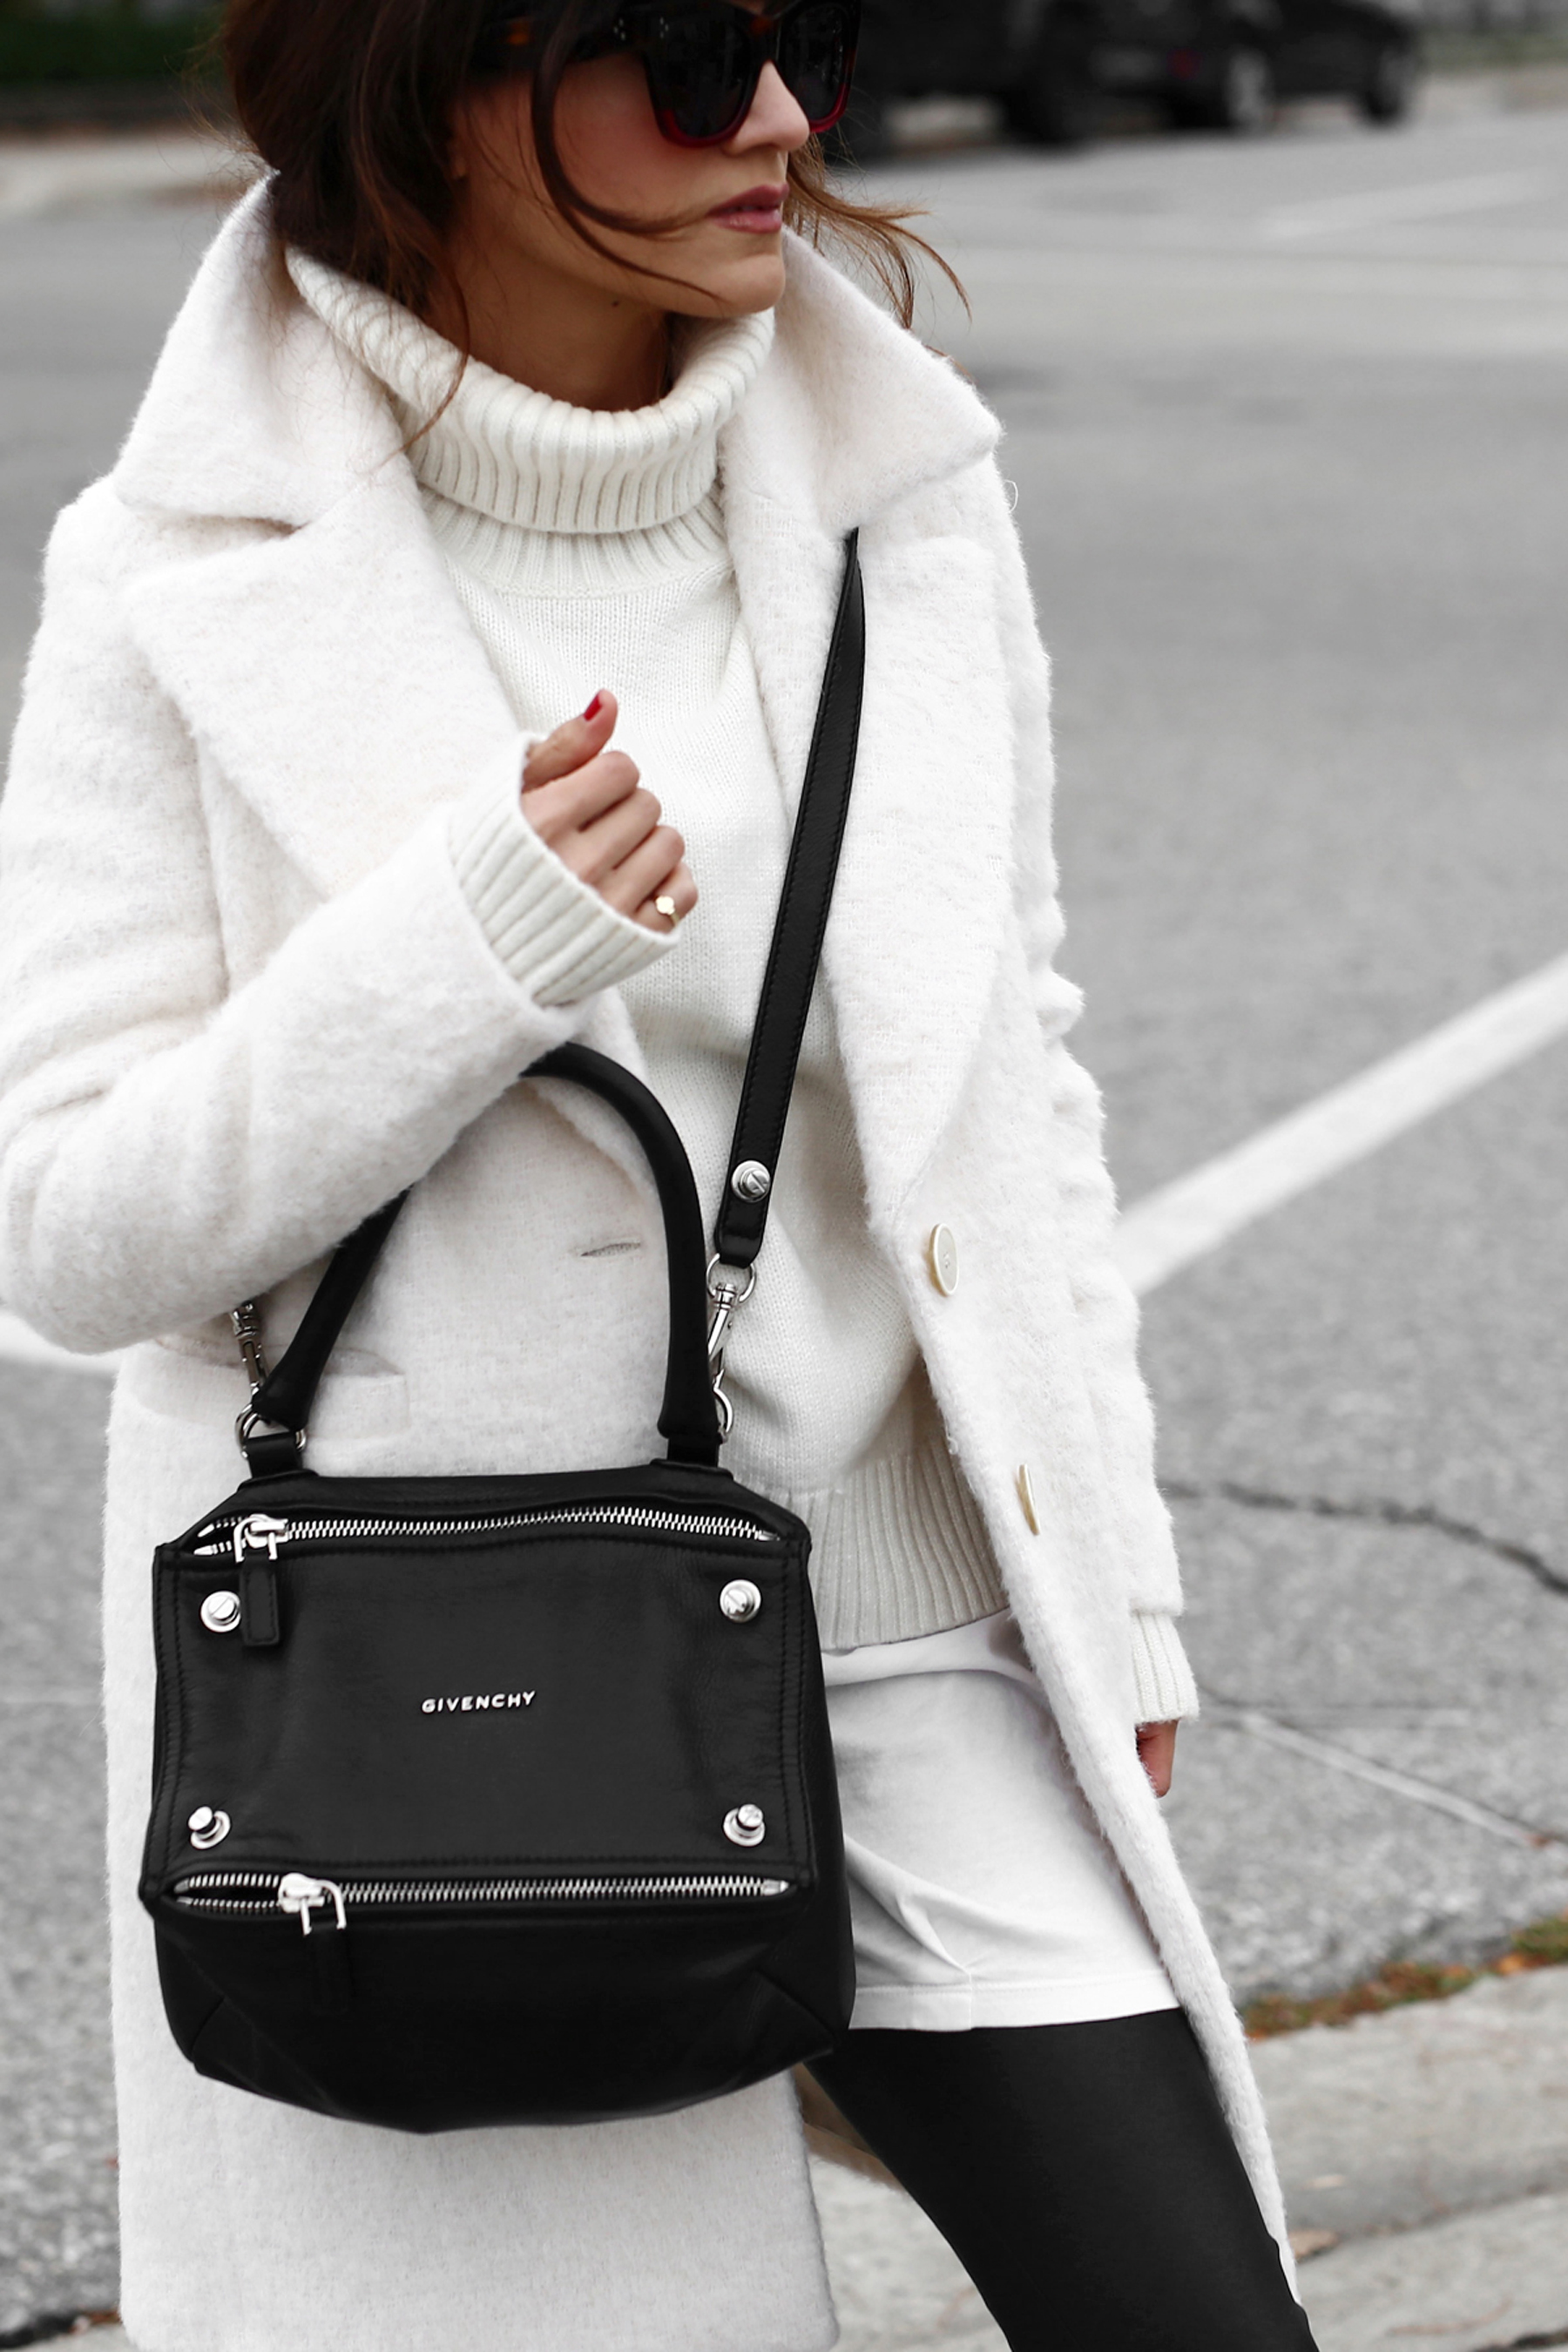 Winter White oversized knit, coat, leather leggings, Givenchy leopard print studded boots and Givenchy Pandora bag street style_2709.jpg